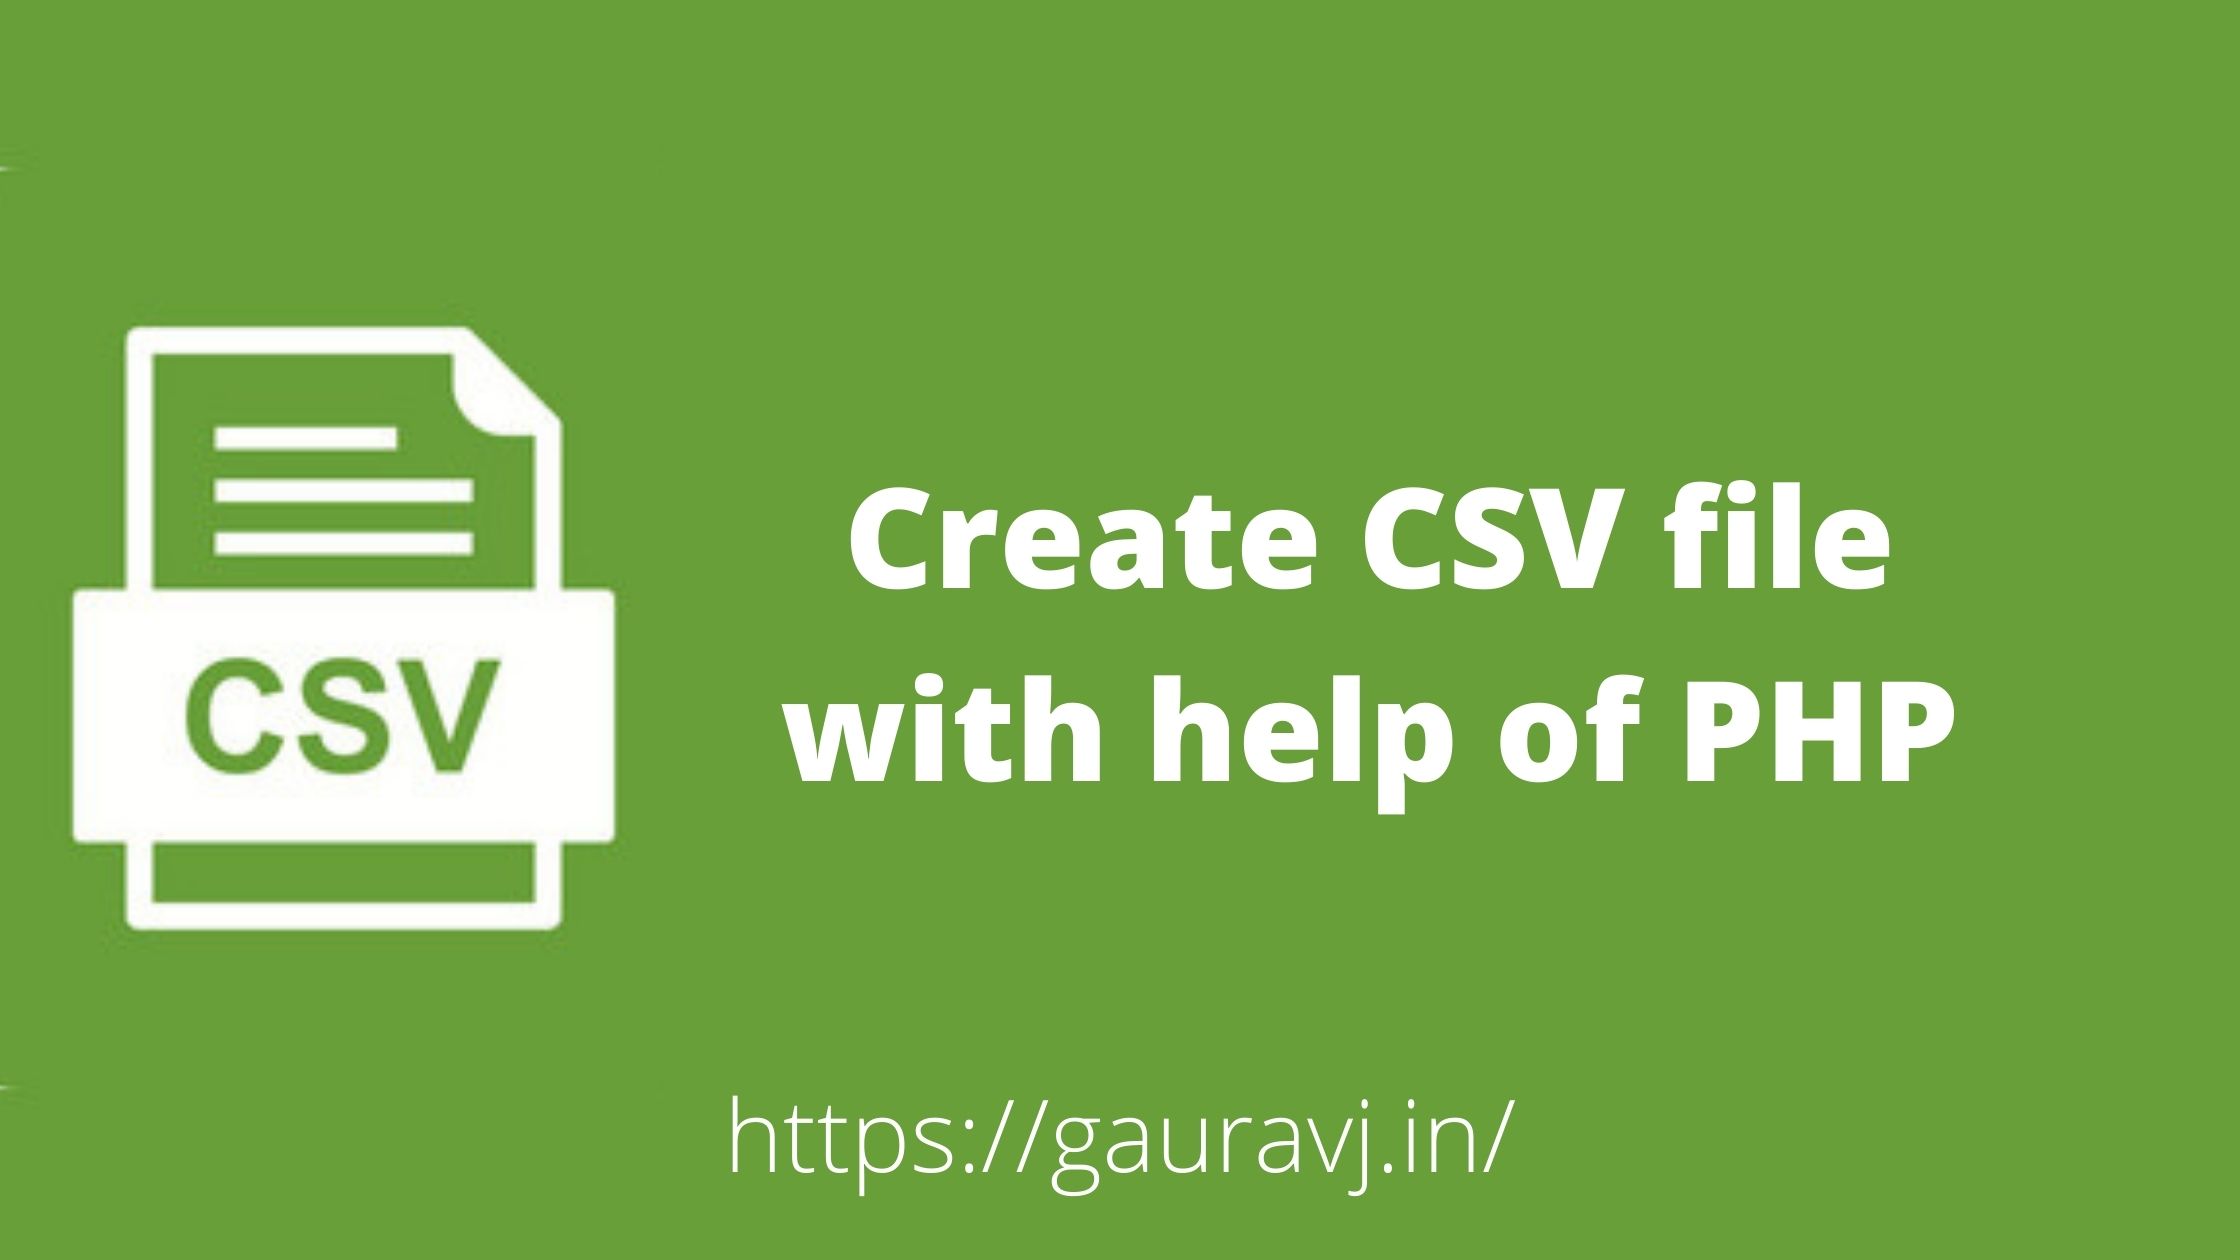 How to create CSV file in PHP?